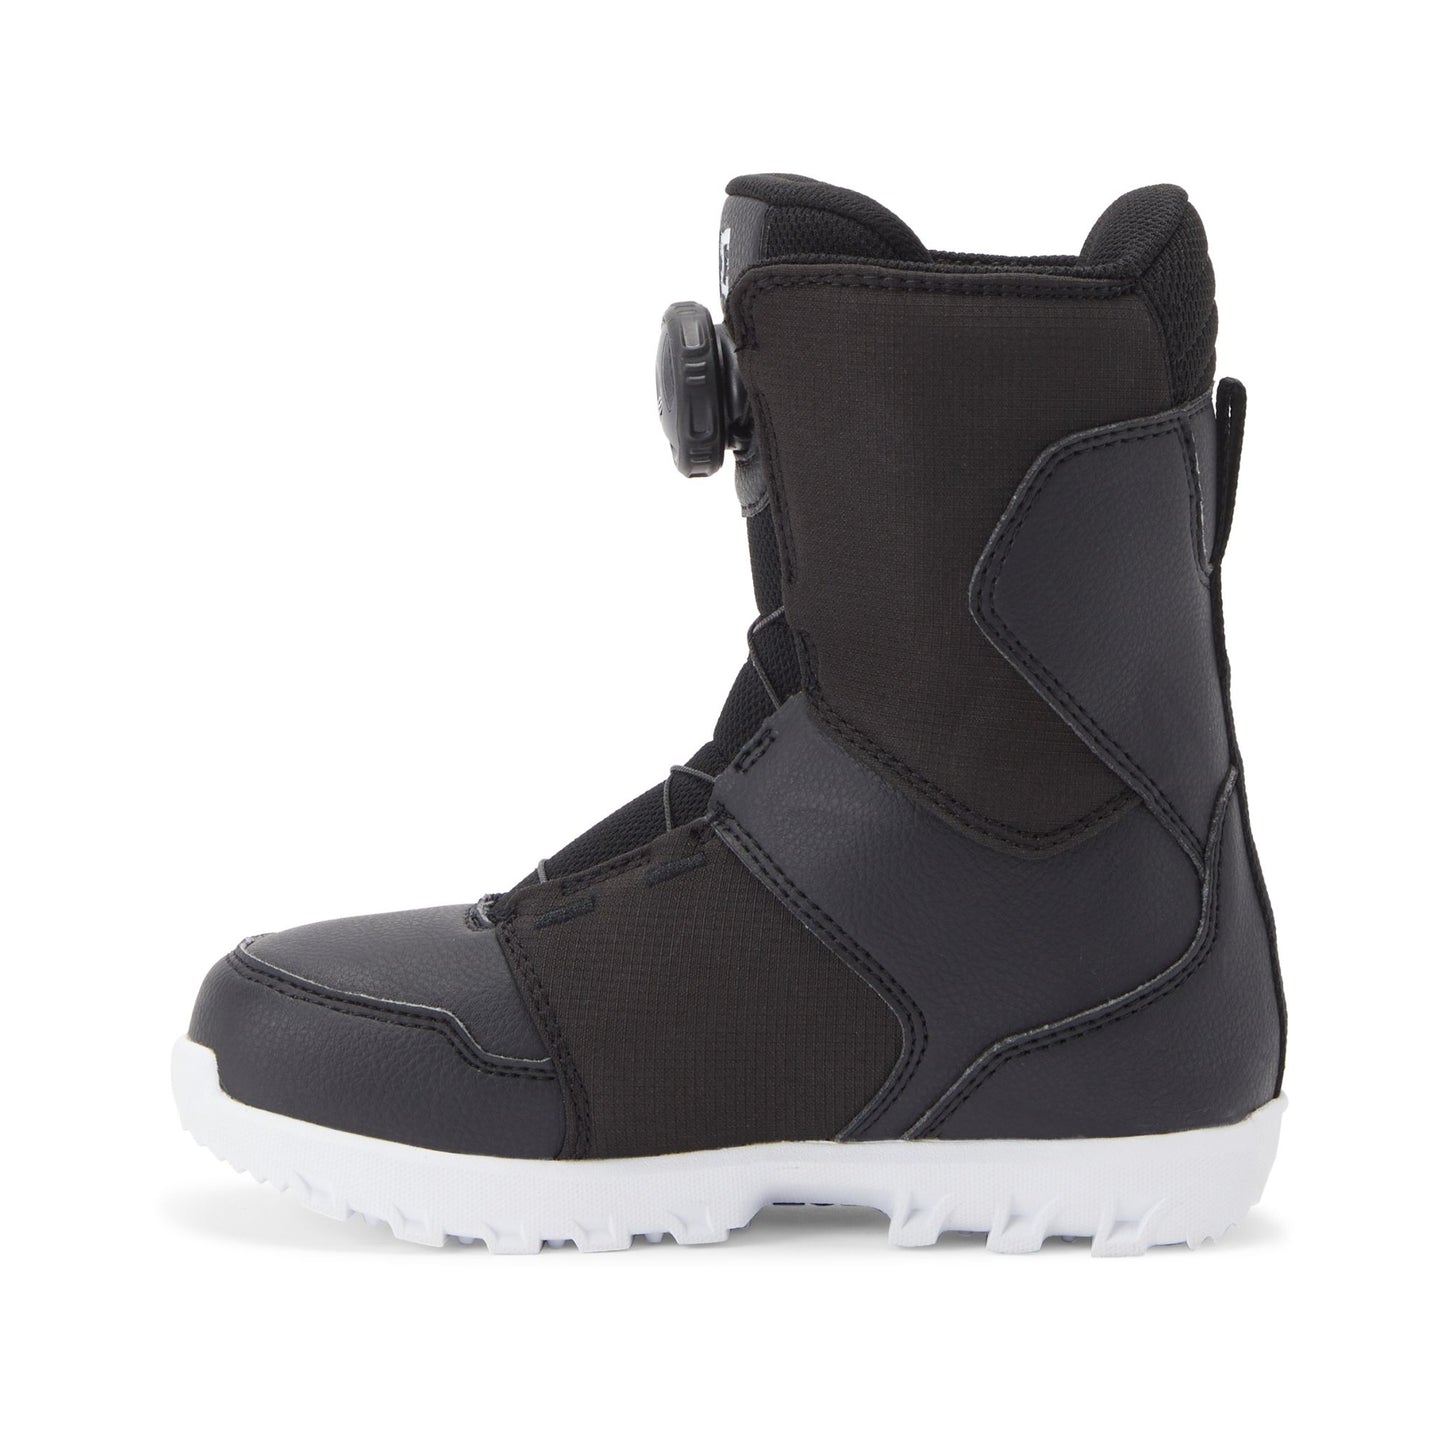 DC Youth Scout BOA Snowboard Boots Black White Snowboard Boots